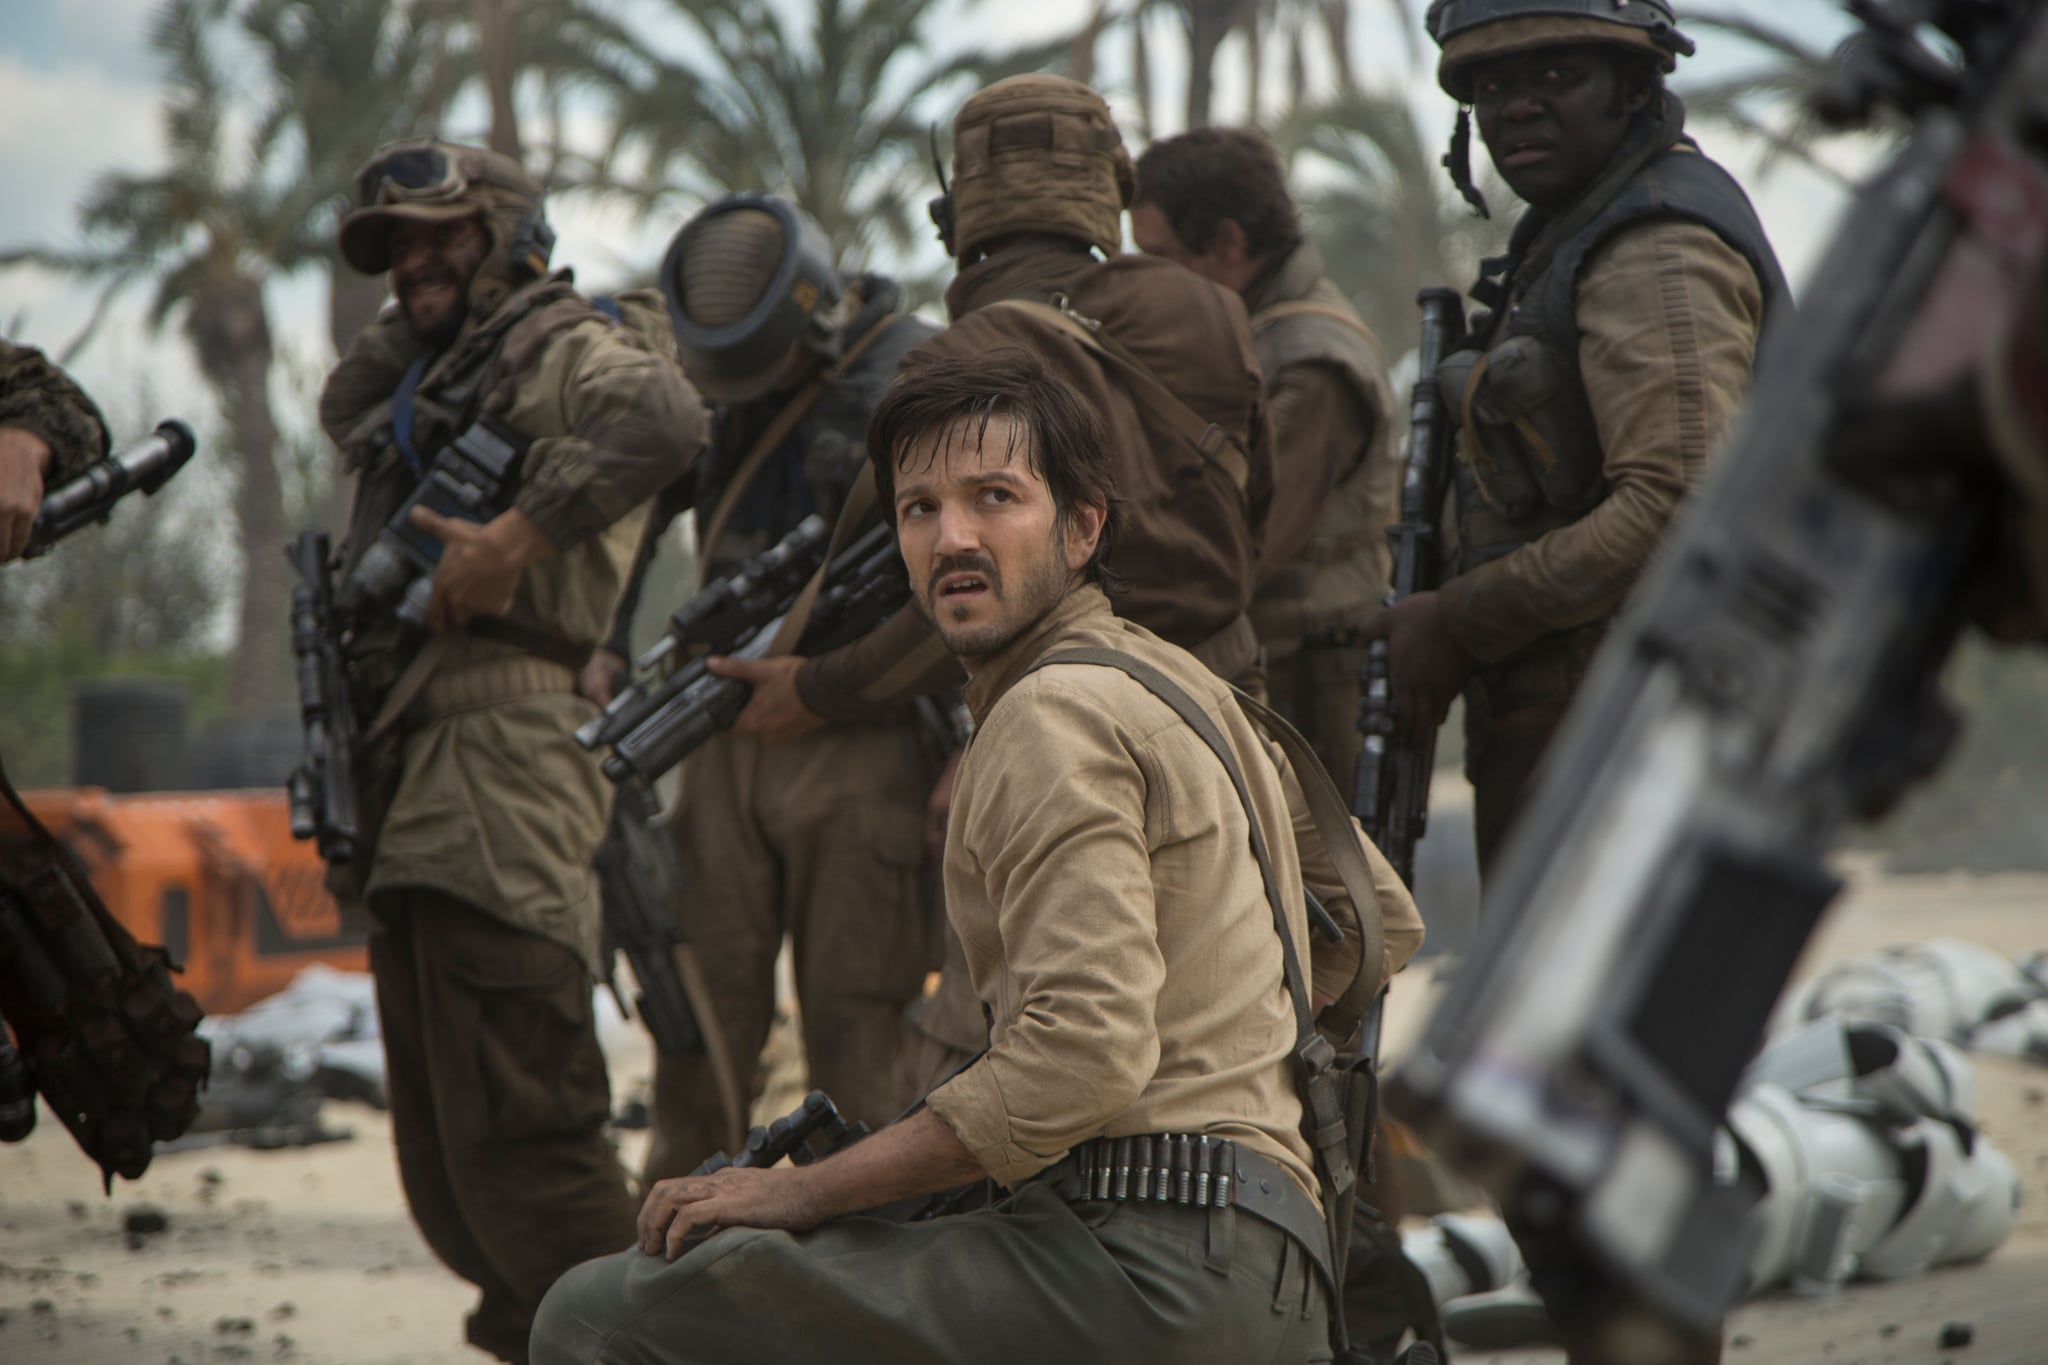 ROGUE ONE: A STAR WARS STORY, Diego Luna, 2016. ph: Jonathan Olley / Walt Disney Studios Motion Pictures / Lucasfilm Ltd. /Courtesy Everett Collection